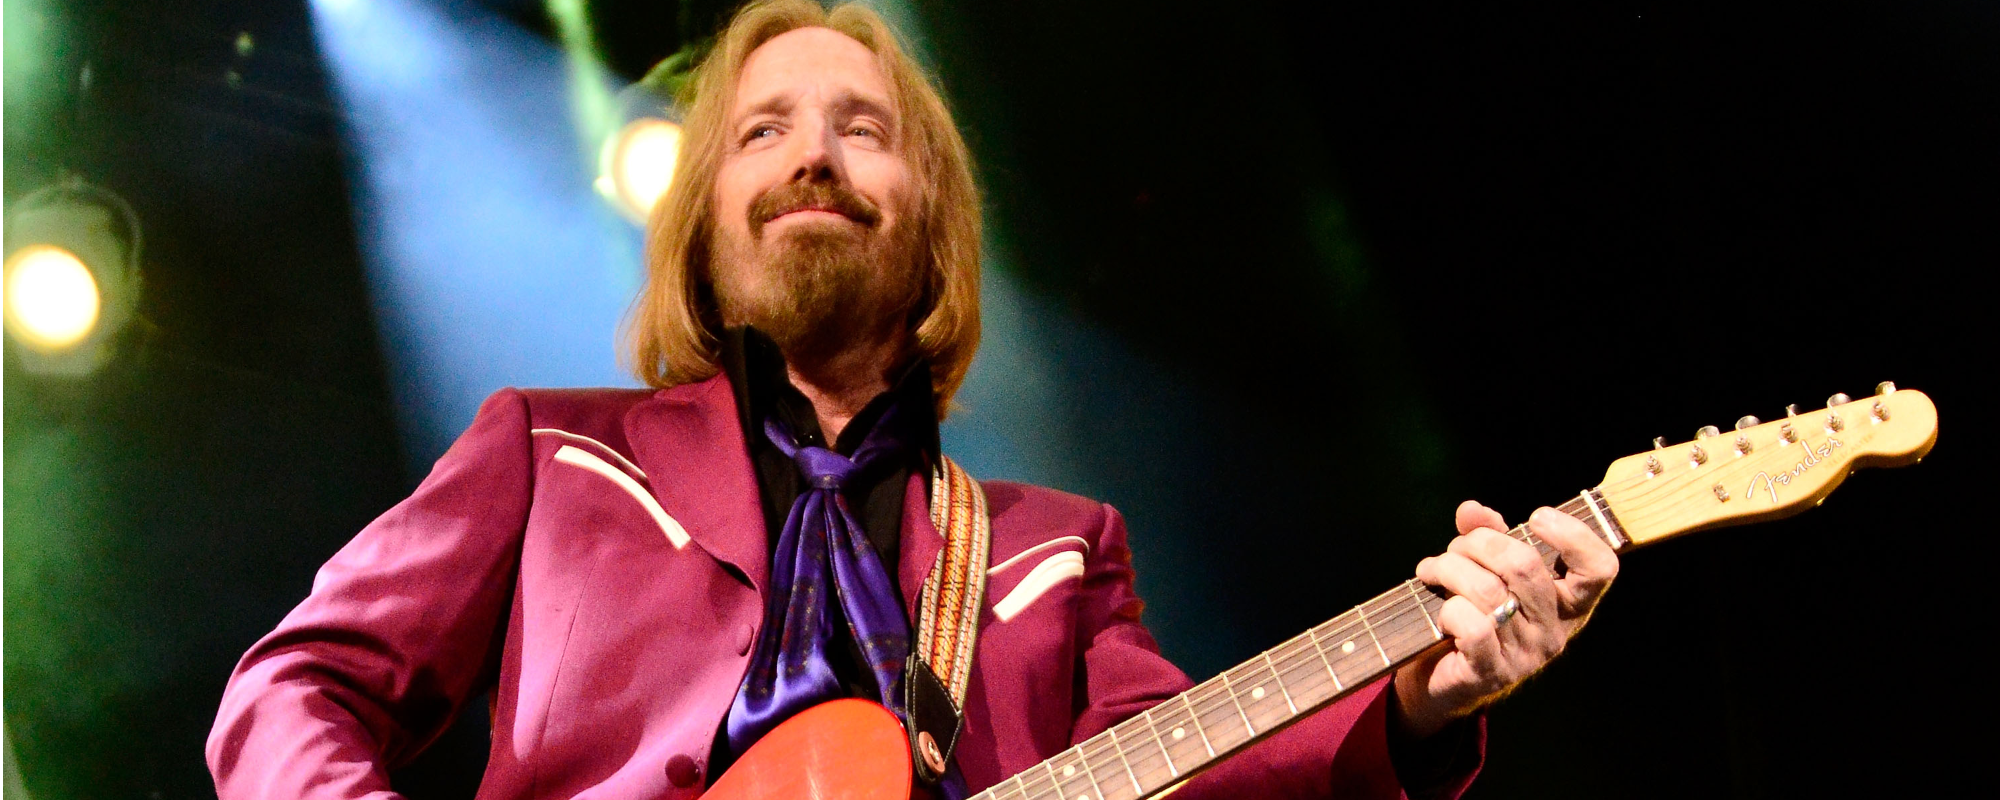 Tom Petty’s “Love Is a Long Road” Enjoys Absurd Streaming Surge Following ‘Grand Theft Auto VI’ Trailer Drop